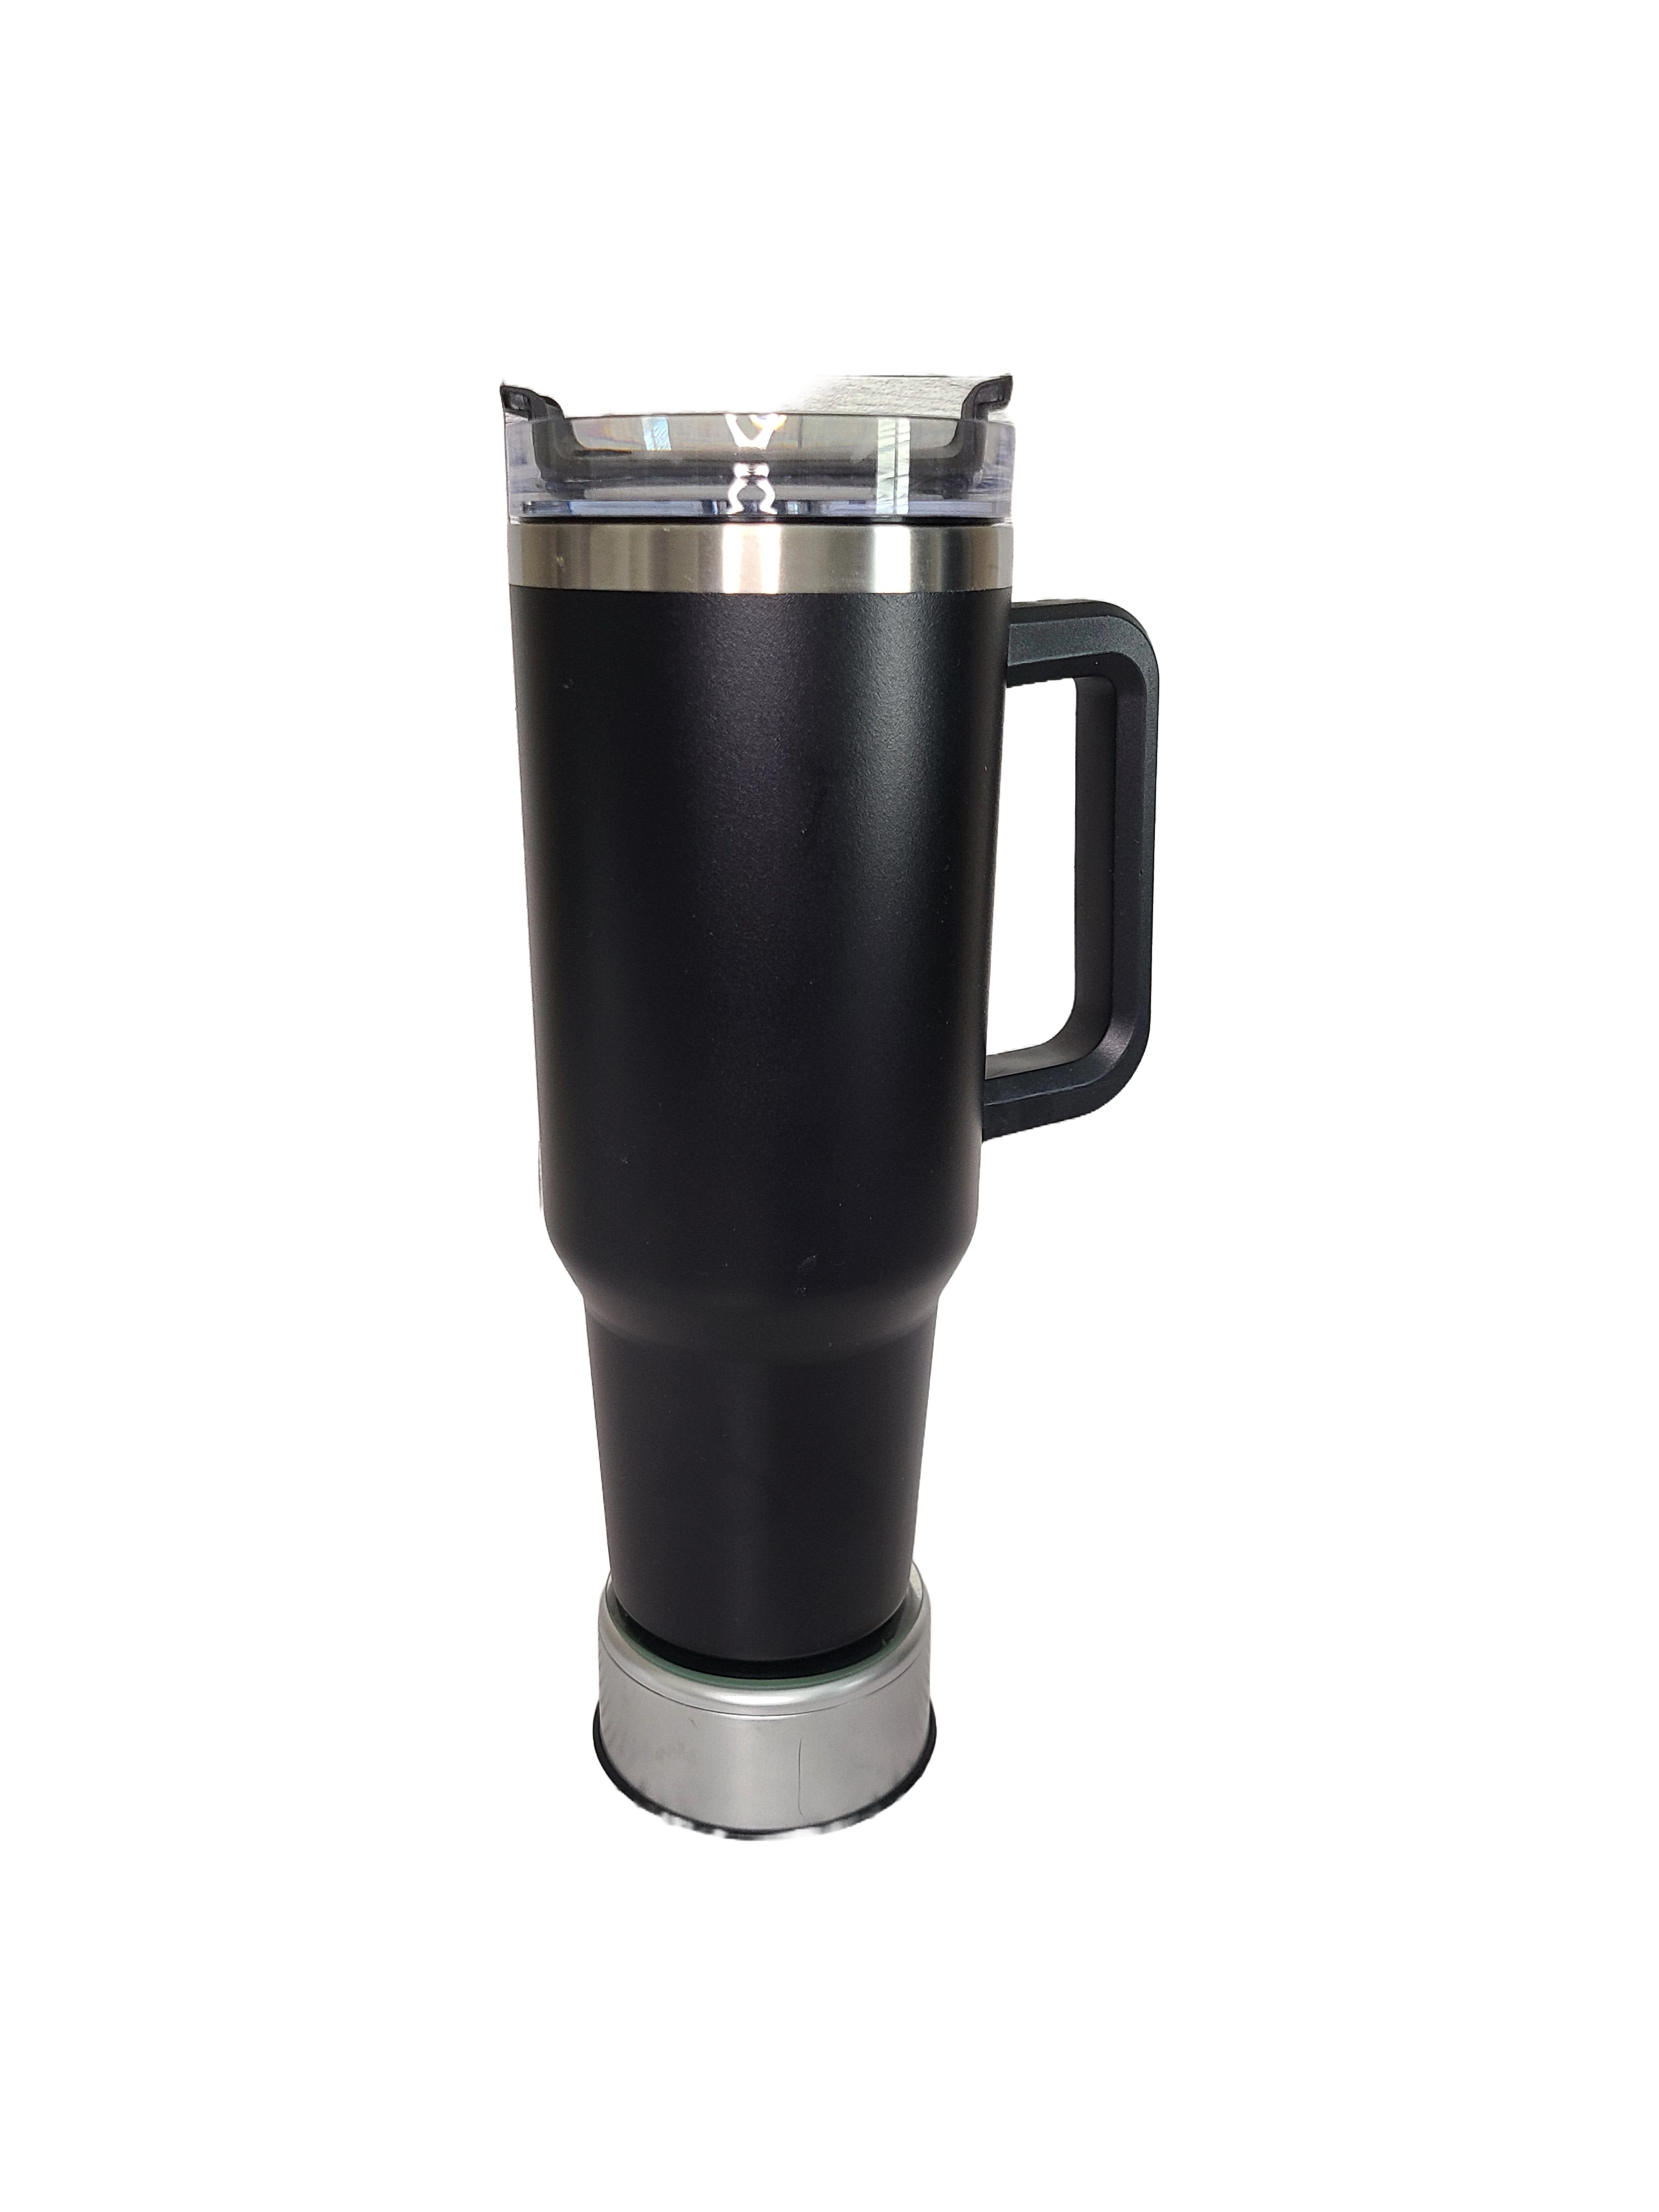 40 oz Stainless Steel Tumbler with Handle-"Taylor Swift" theme